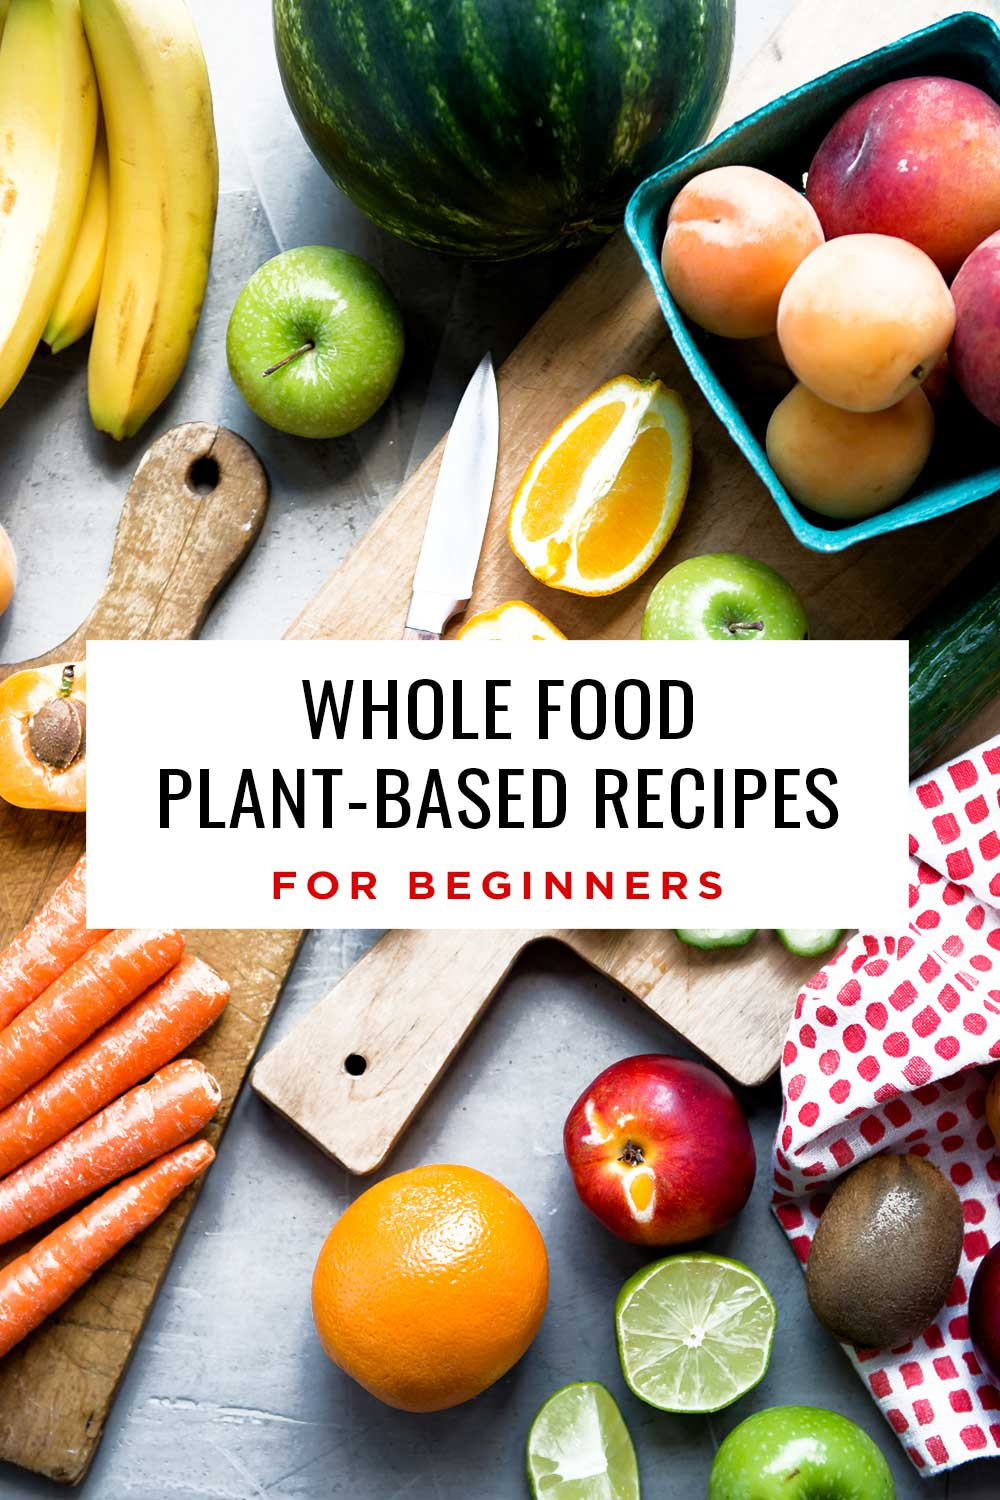 Plant Based Recipes For Beginners 7 Days
 Whole Food Plant Based Recipes for Beginners